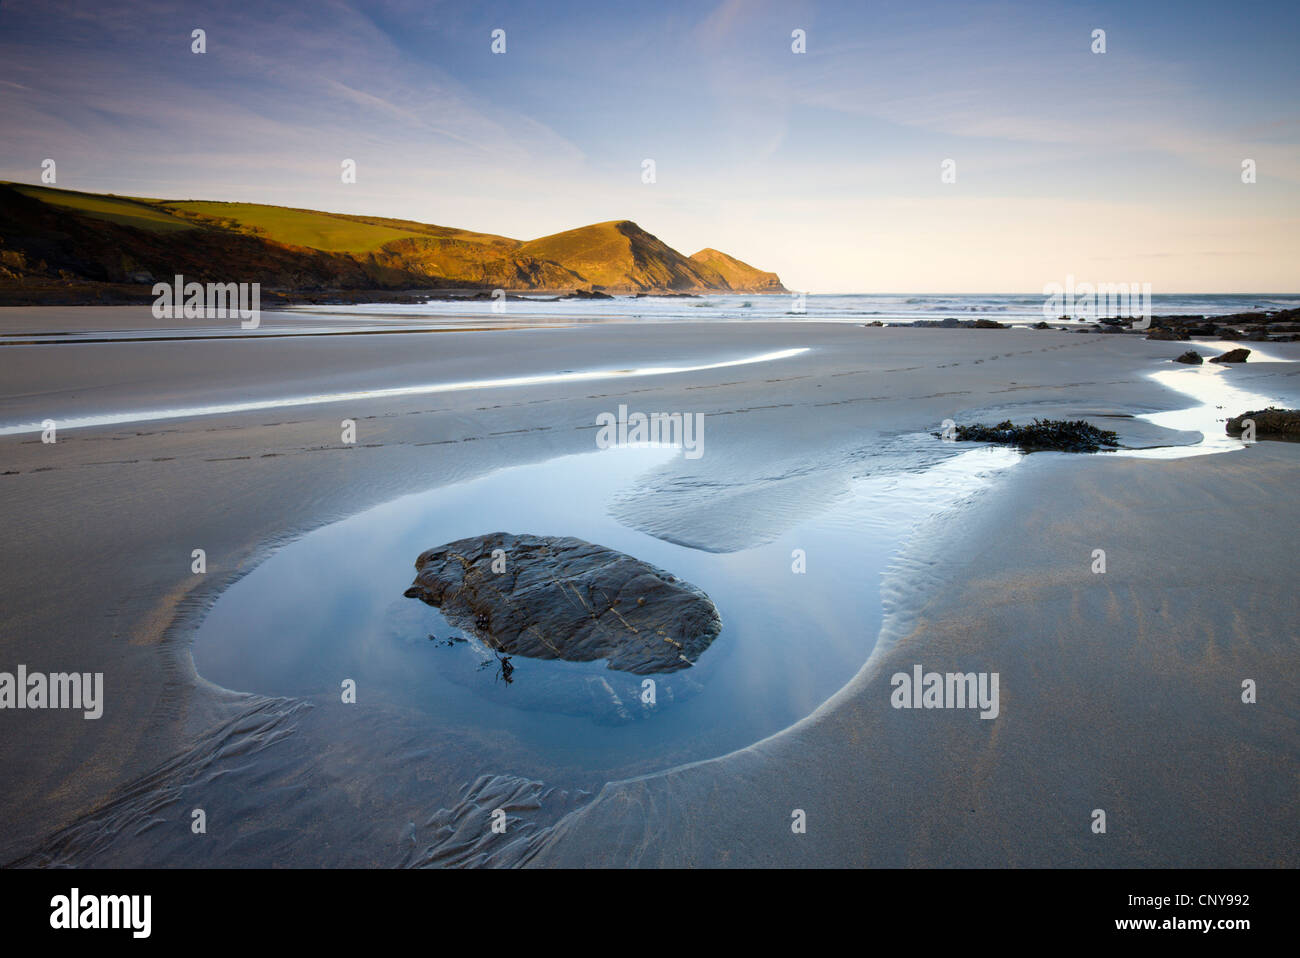 Exposed rockpool at low tide on a deserted beach at Crackington Haven, Cornwall, England. April 2009 Stock Photo